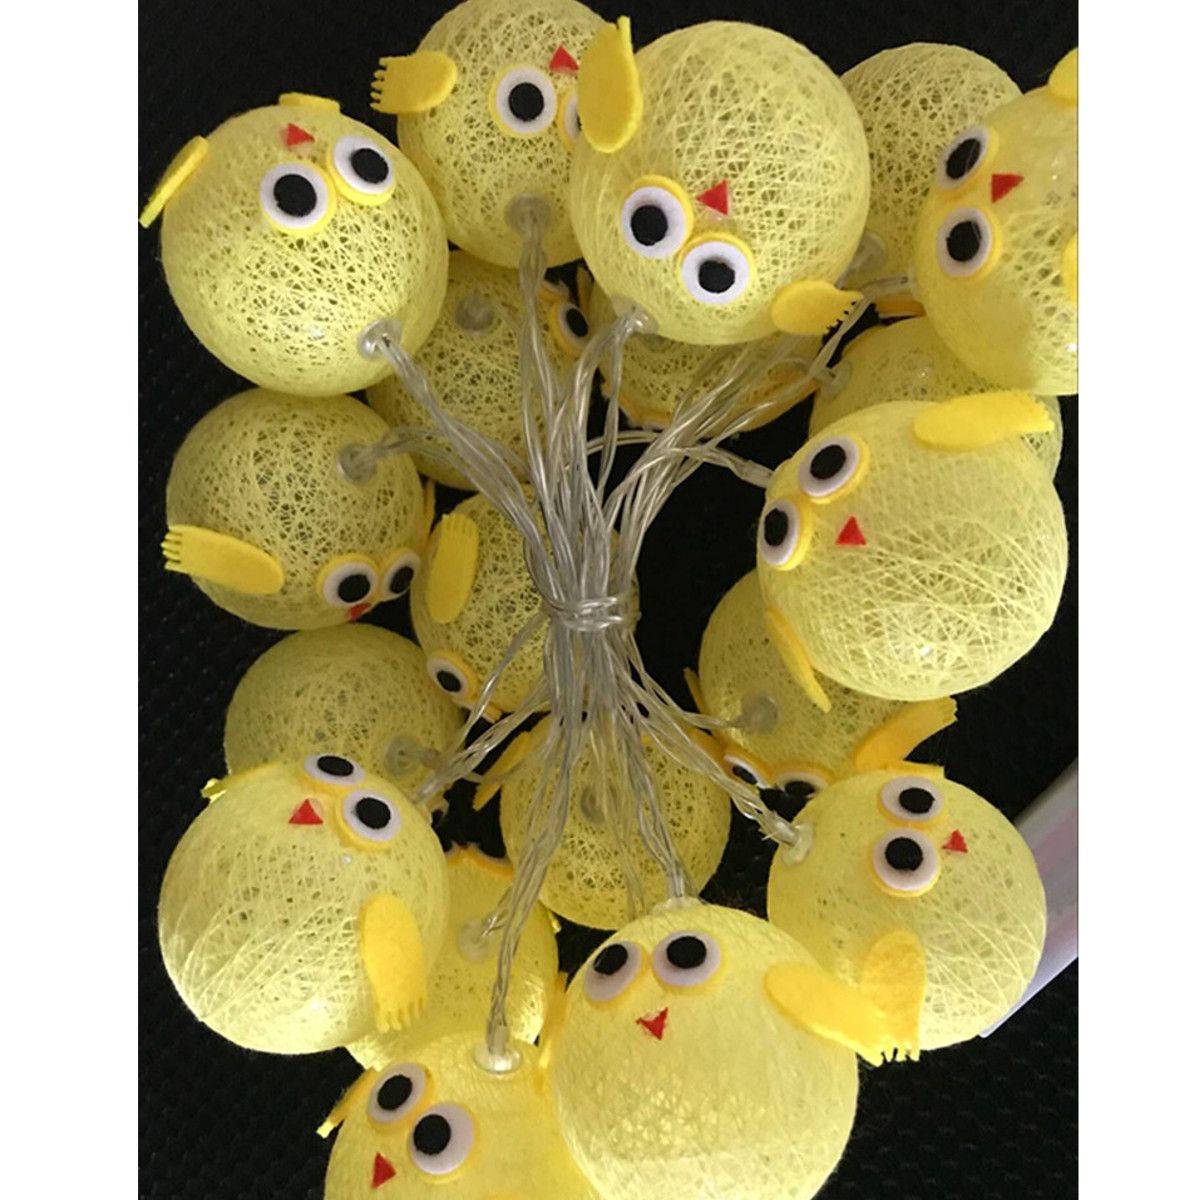 101520-Chicken-Cotton-Fairy-String-Light-Birthday-Party-Kids-Bedroom-Decorations-1640768-3